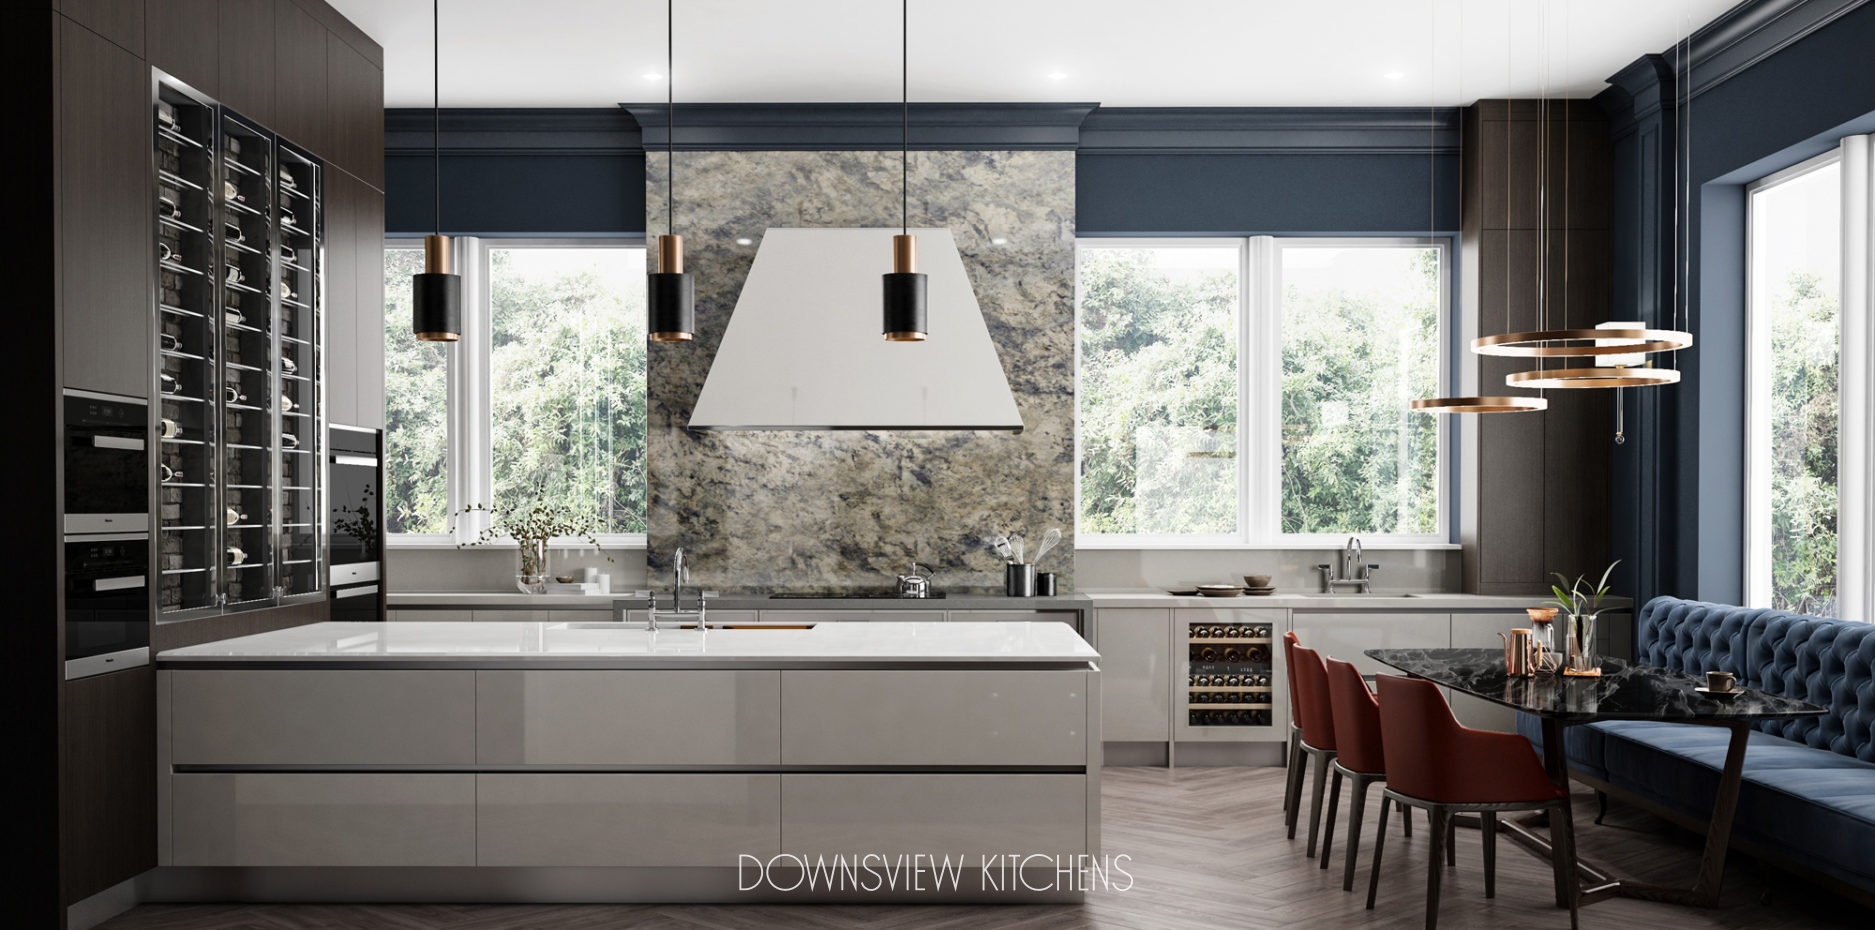 Uncommon Beauty Downsview Kitchens And Fine Custom Cabinetry Manufacturers Of Custom Kitchen Cabinets